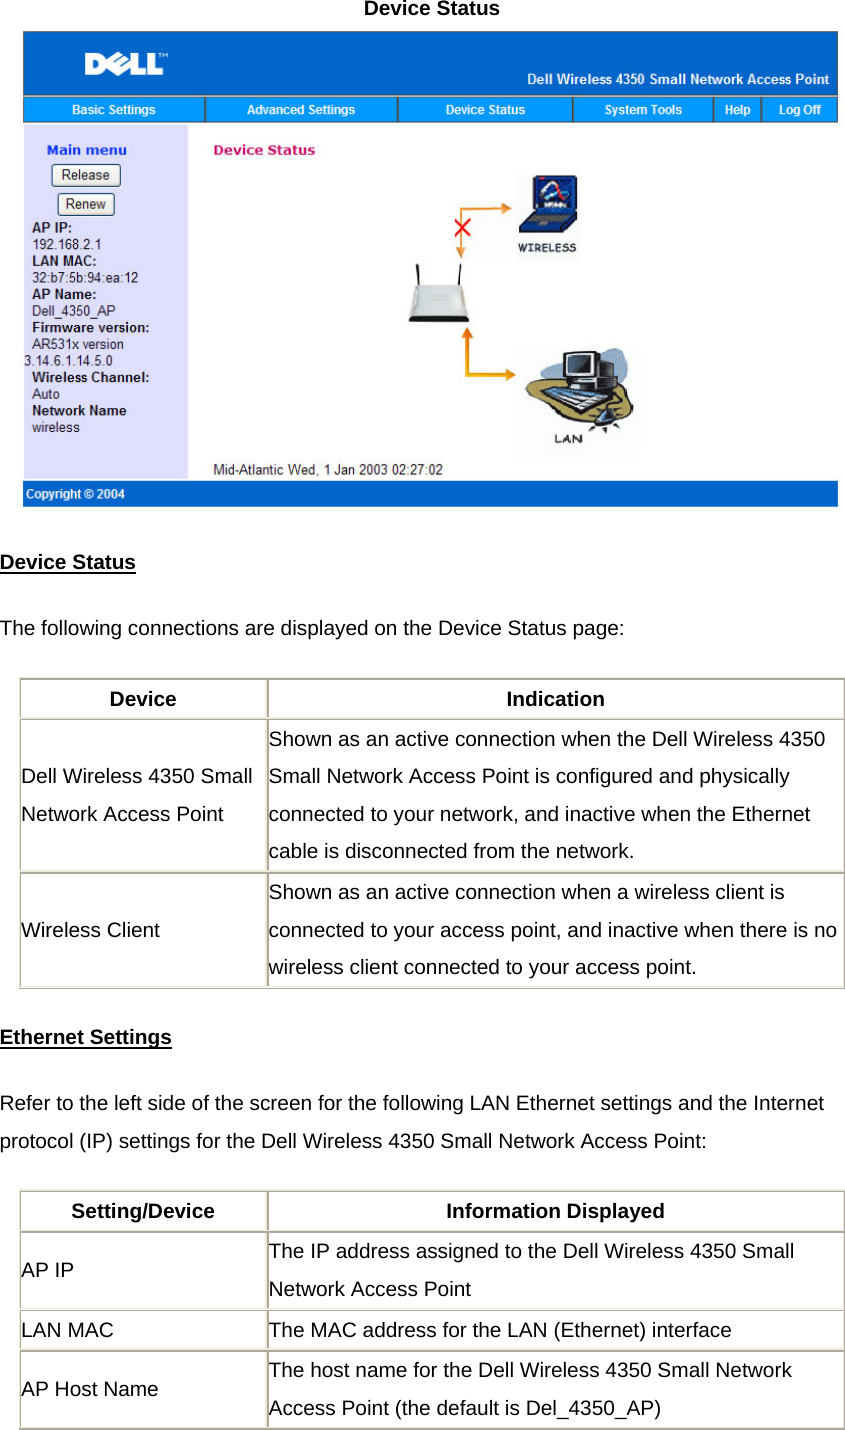 Device Status  Device Status  The following connections are displayed on the Device Status page:  Device Indication Dell Wireless 4350 Small Network Access Point Shown as an active connection when the Dell Wireless 4350 Small Network Access Point is configured and physically connected to your network, and inactive when the Ethernet cable is disconnected from the network. Wireless Client  Shown as an active connection when a wireless client is connected to your access point, and inactive when there is no wireless client connected to your access point. Ethernet SettingsRefer to the left side of the screen for the following LAN Ethernet settings and the Internet protocol (IP) settings for the Dell Wireless 4350 Small Network Access Point: Setting/Device Information Displayed AP IP  The IP address assigned to the Dell Wireless 4350 Small Network Access Point LAN MAC  The MAC address for the LAN (Ethernet) interface AP Host Name  The host name for the Dell Wireless 4350 Small Network Access Point (the default is Del_4350_AP) 